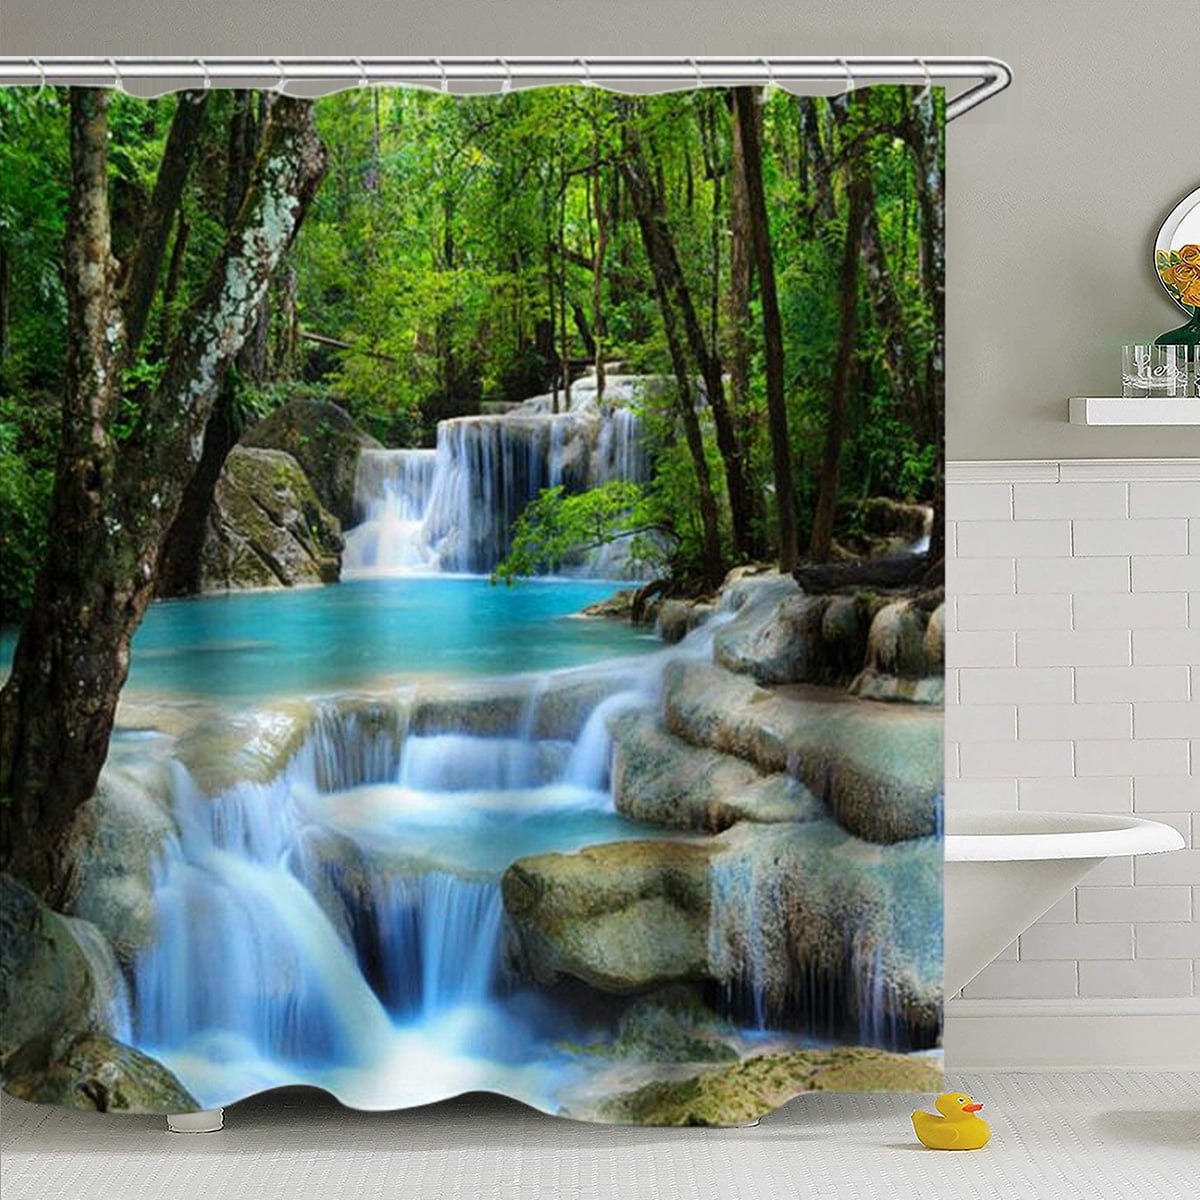 Details about   Waterfall Forest Cave Shower Curtain Bathroom Decor Fabric 12hooks 71" 